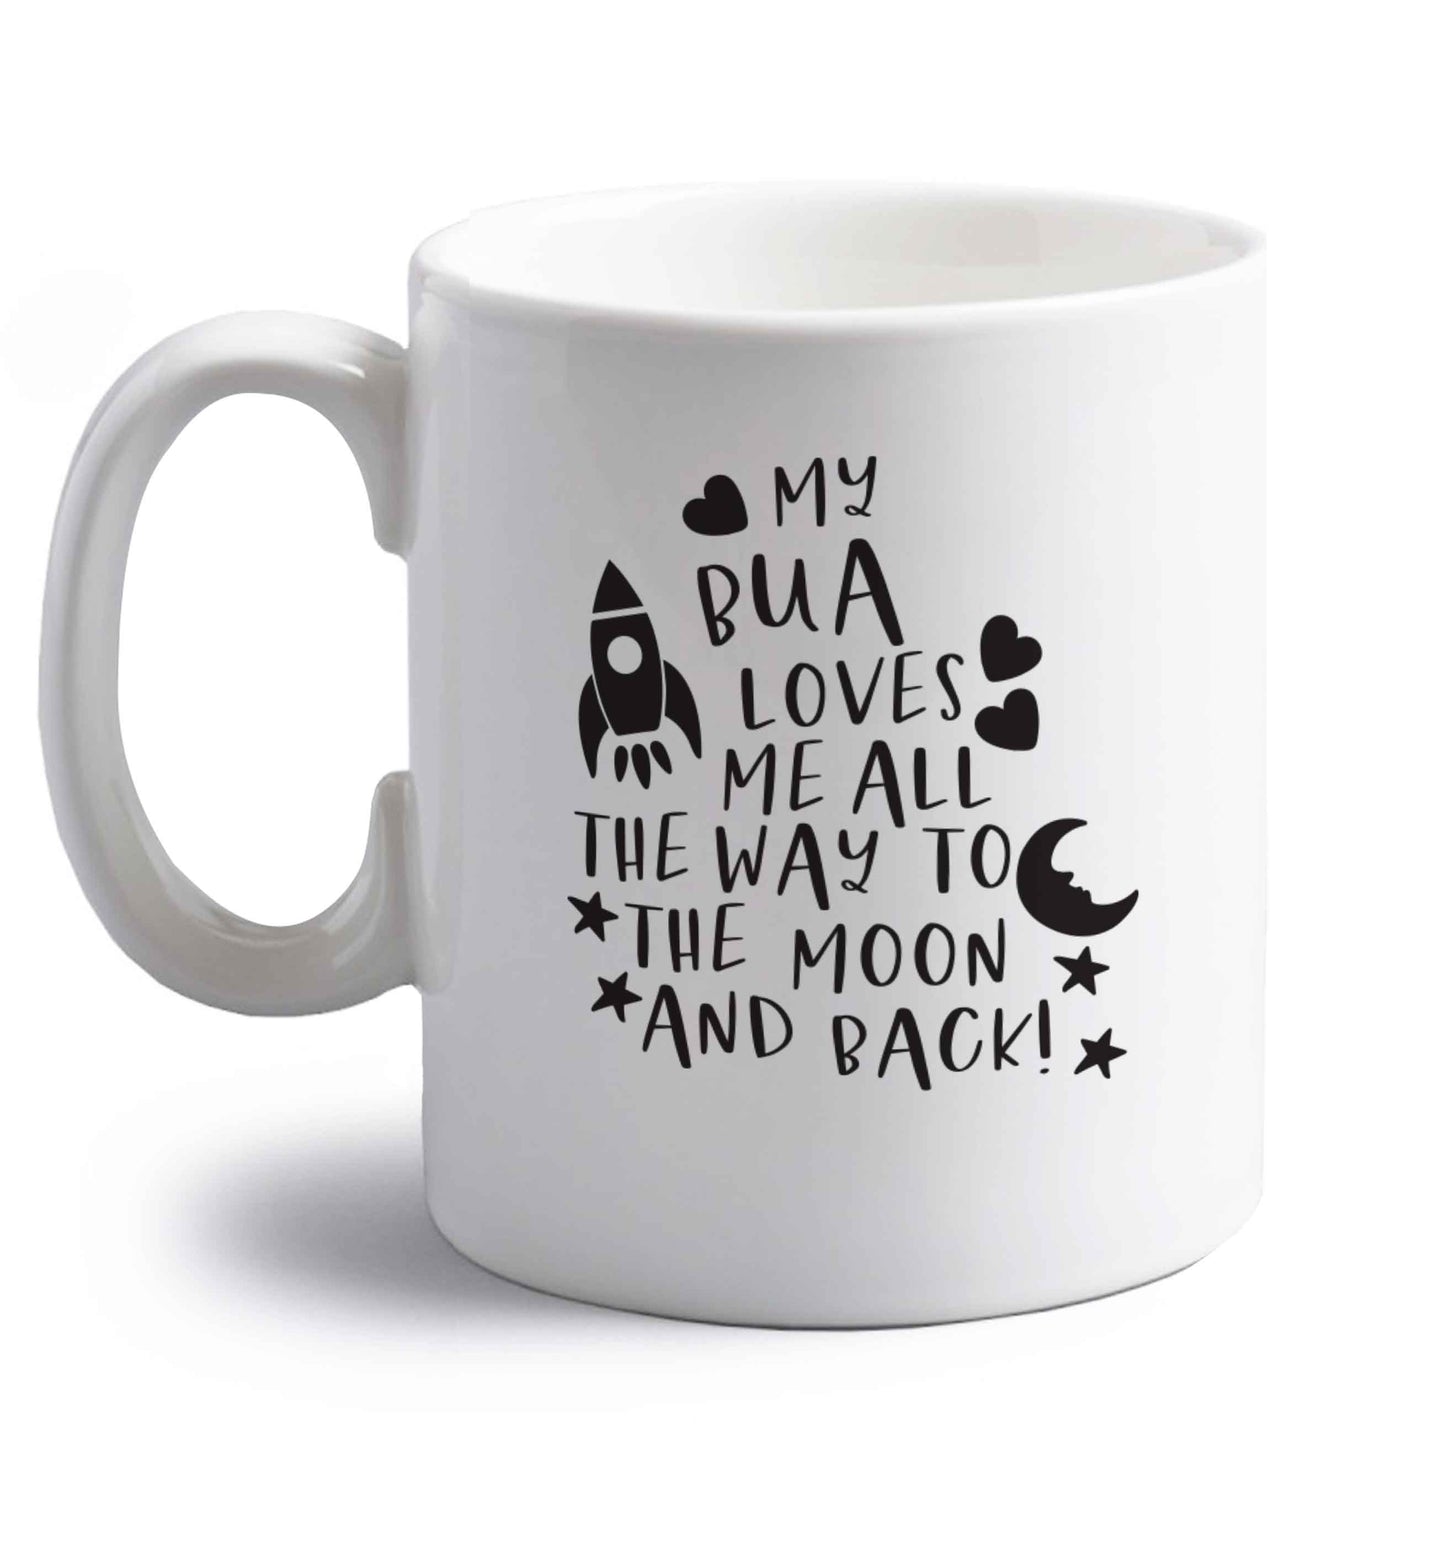 My bua loves me all they way to the moon and back right handed white ceramic mug 